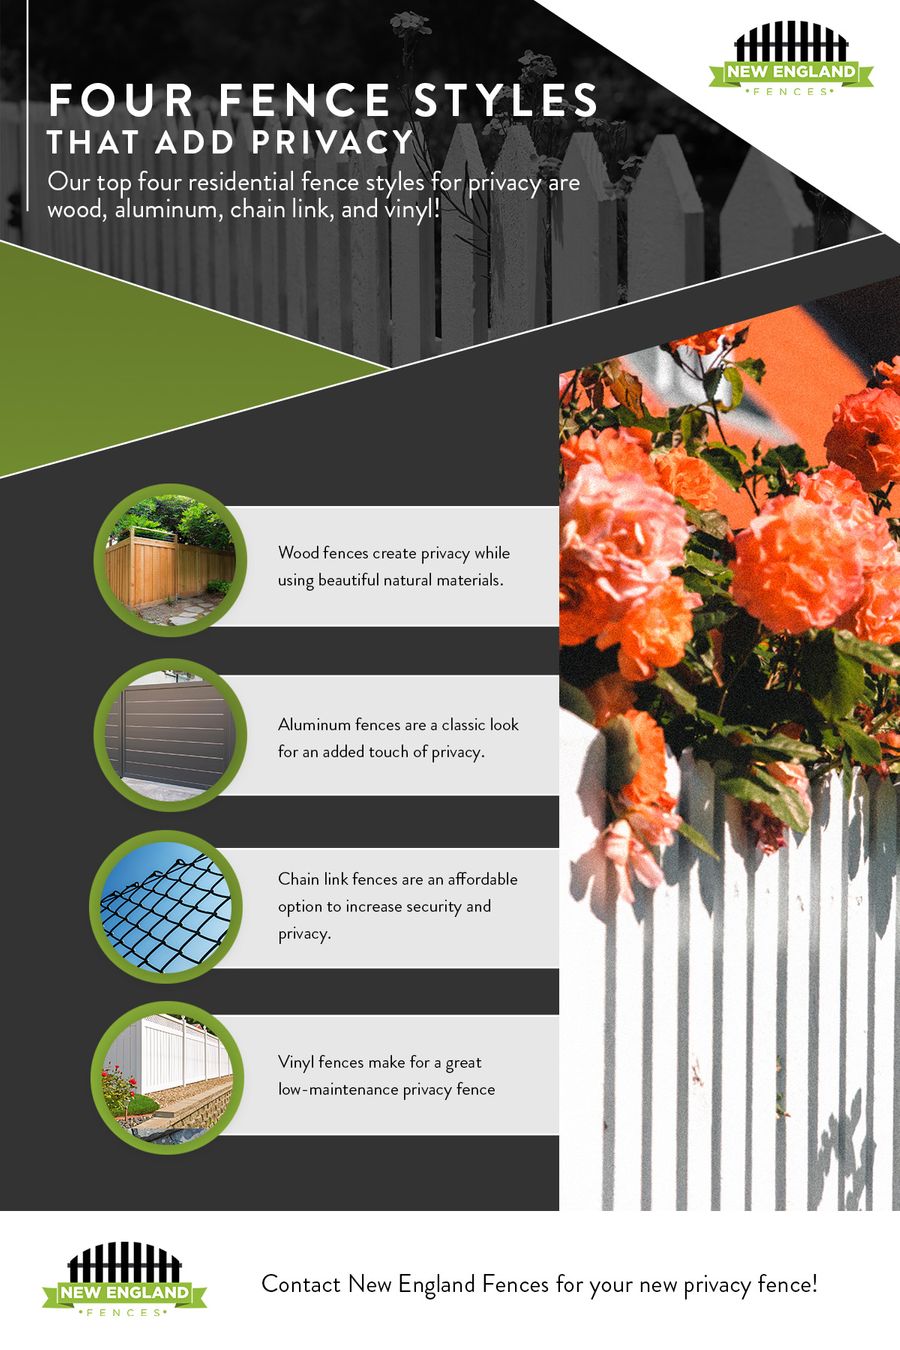 Four-Fence-Styles-That-Add-Privacy-infographic.jpg